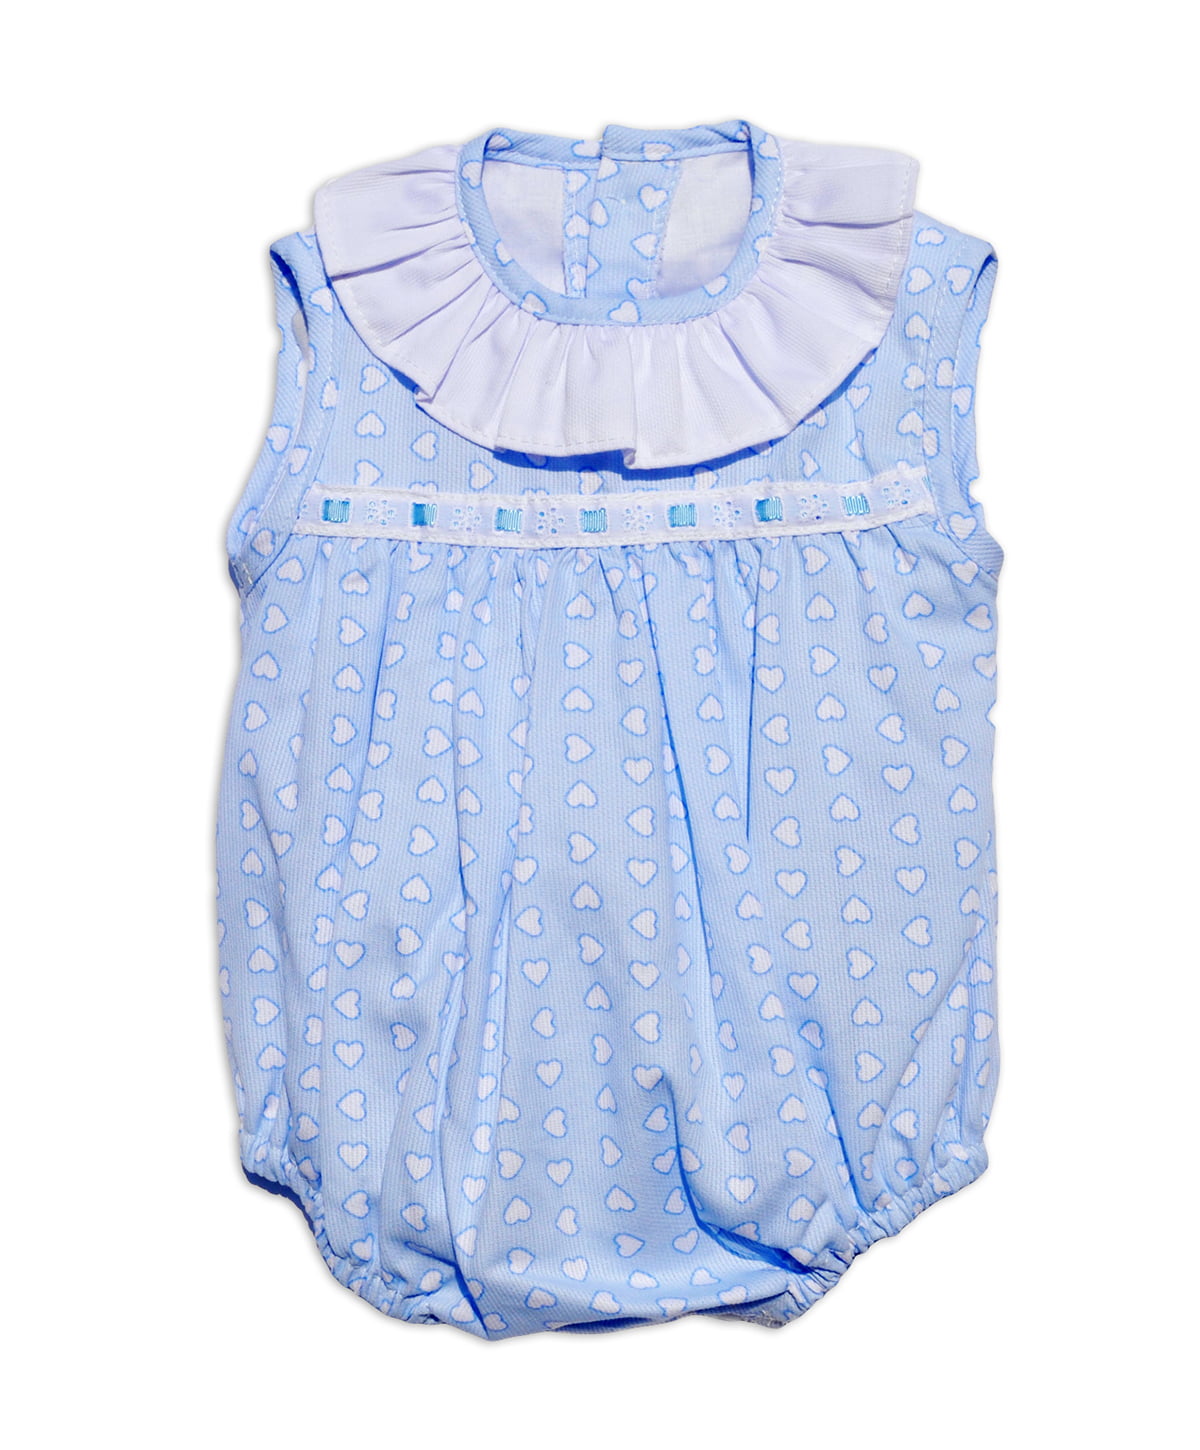 Shop Cute Heart Printed Baby Romper: Order Yours Now!